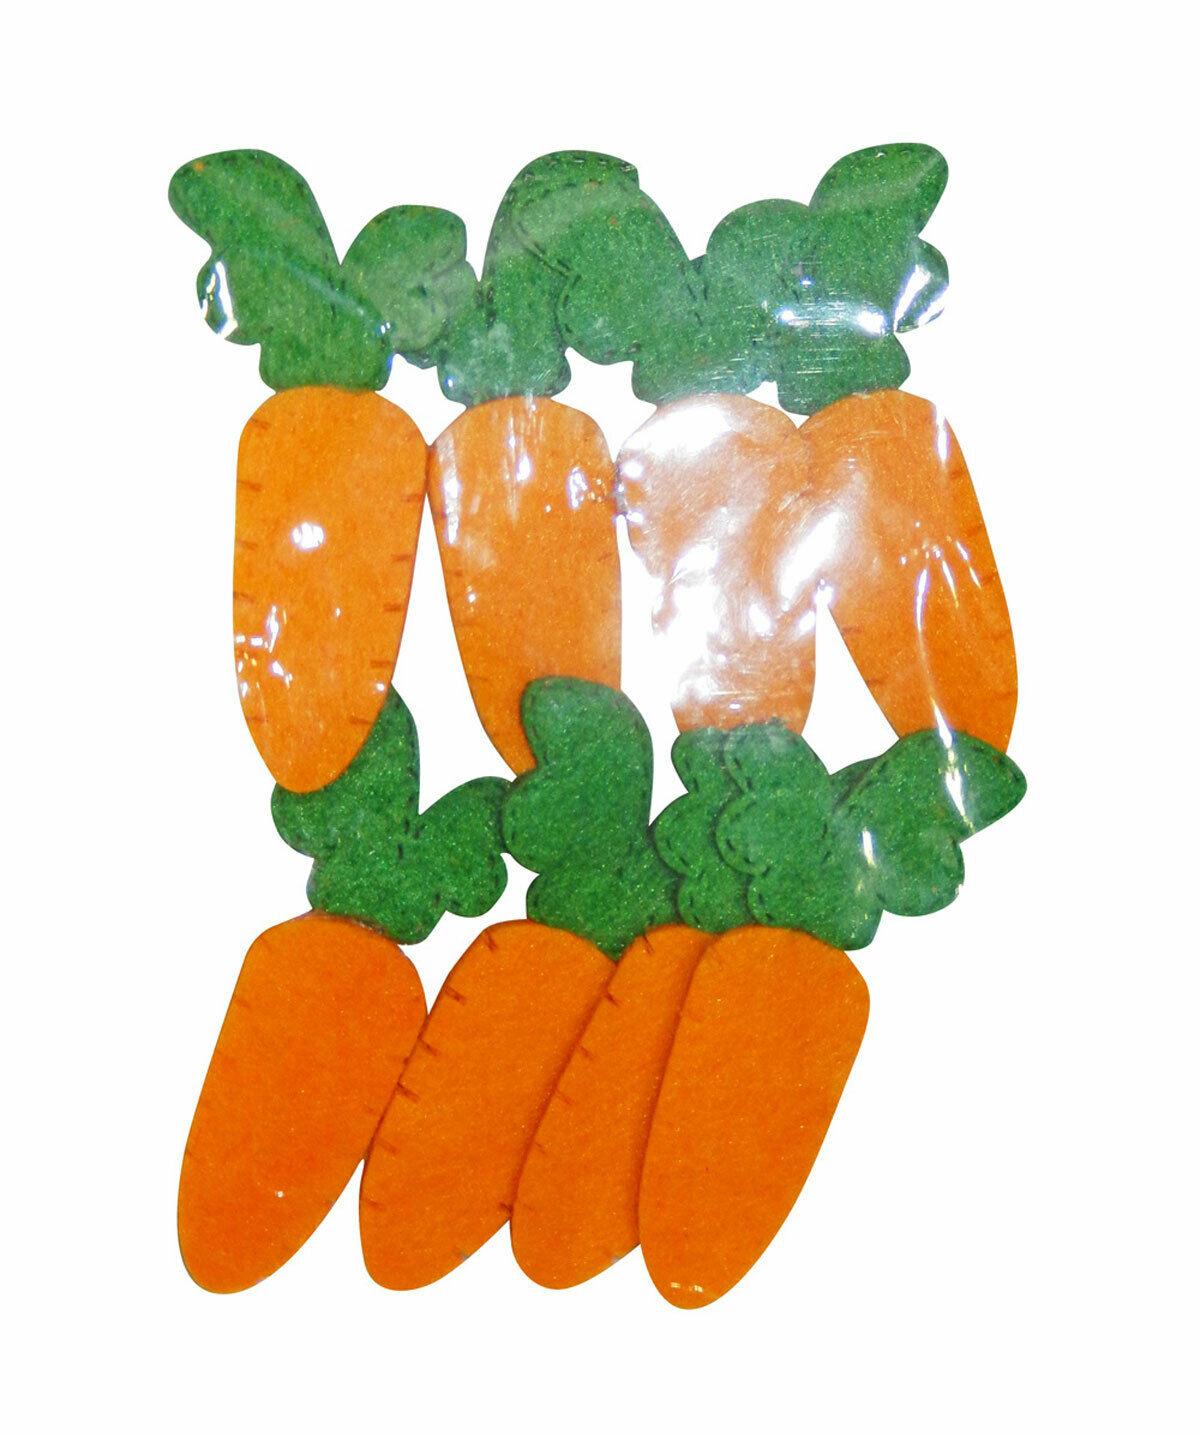 Pack of 8 Bright Felt Bunny Carrots Easter Fancy Dress Party Decorations Prop - Labreeze